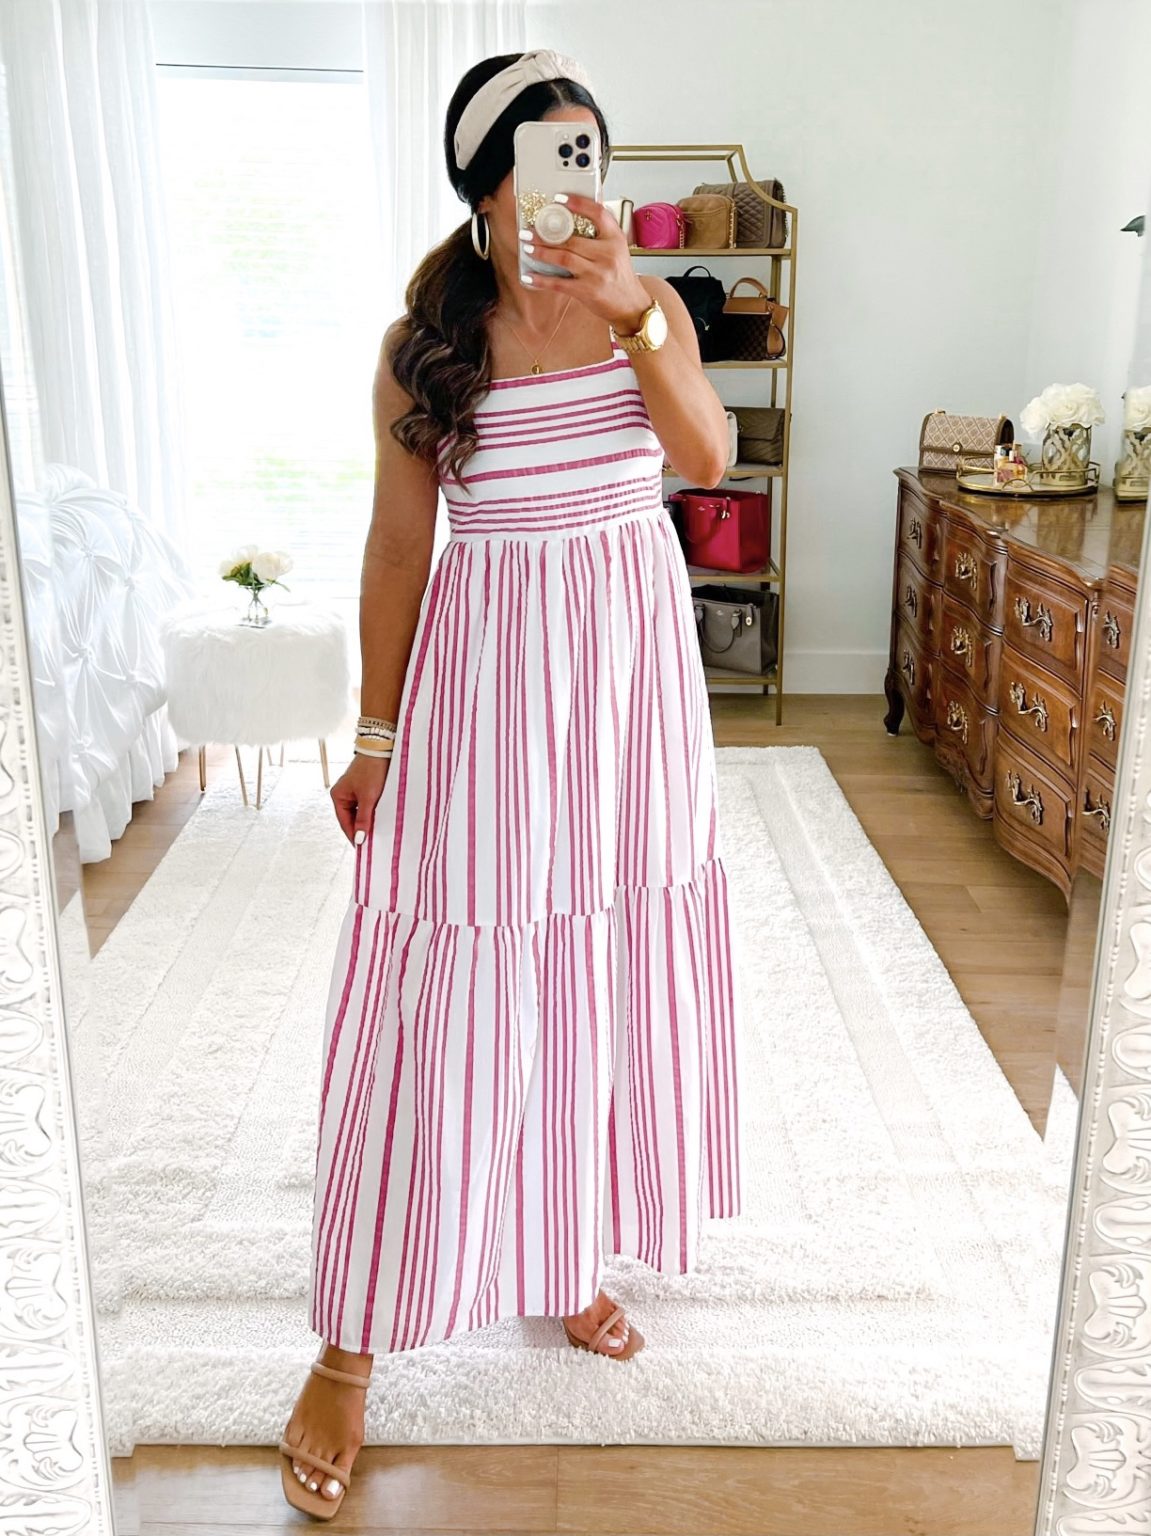 New LOFT June 50% Off Try On + Giveaway! - The Double Take Girls